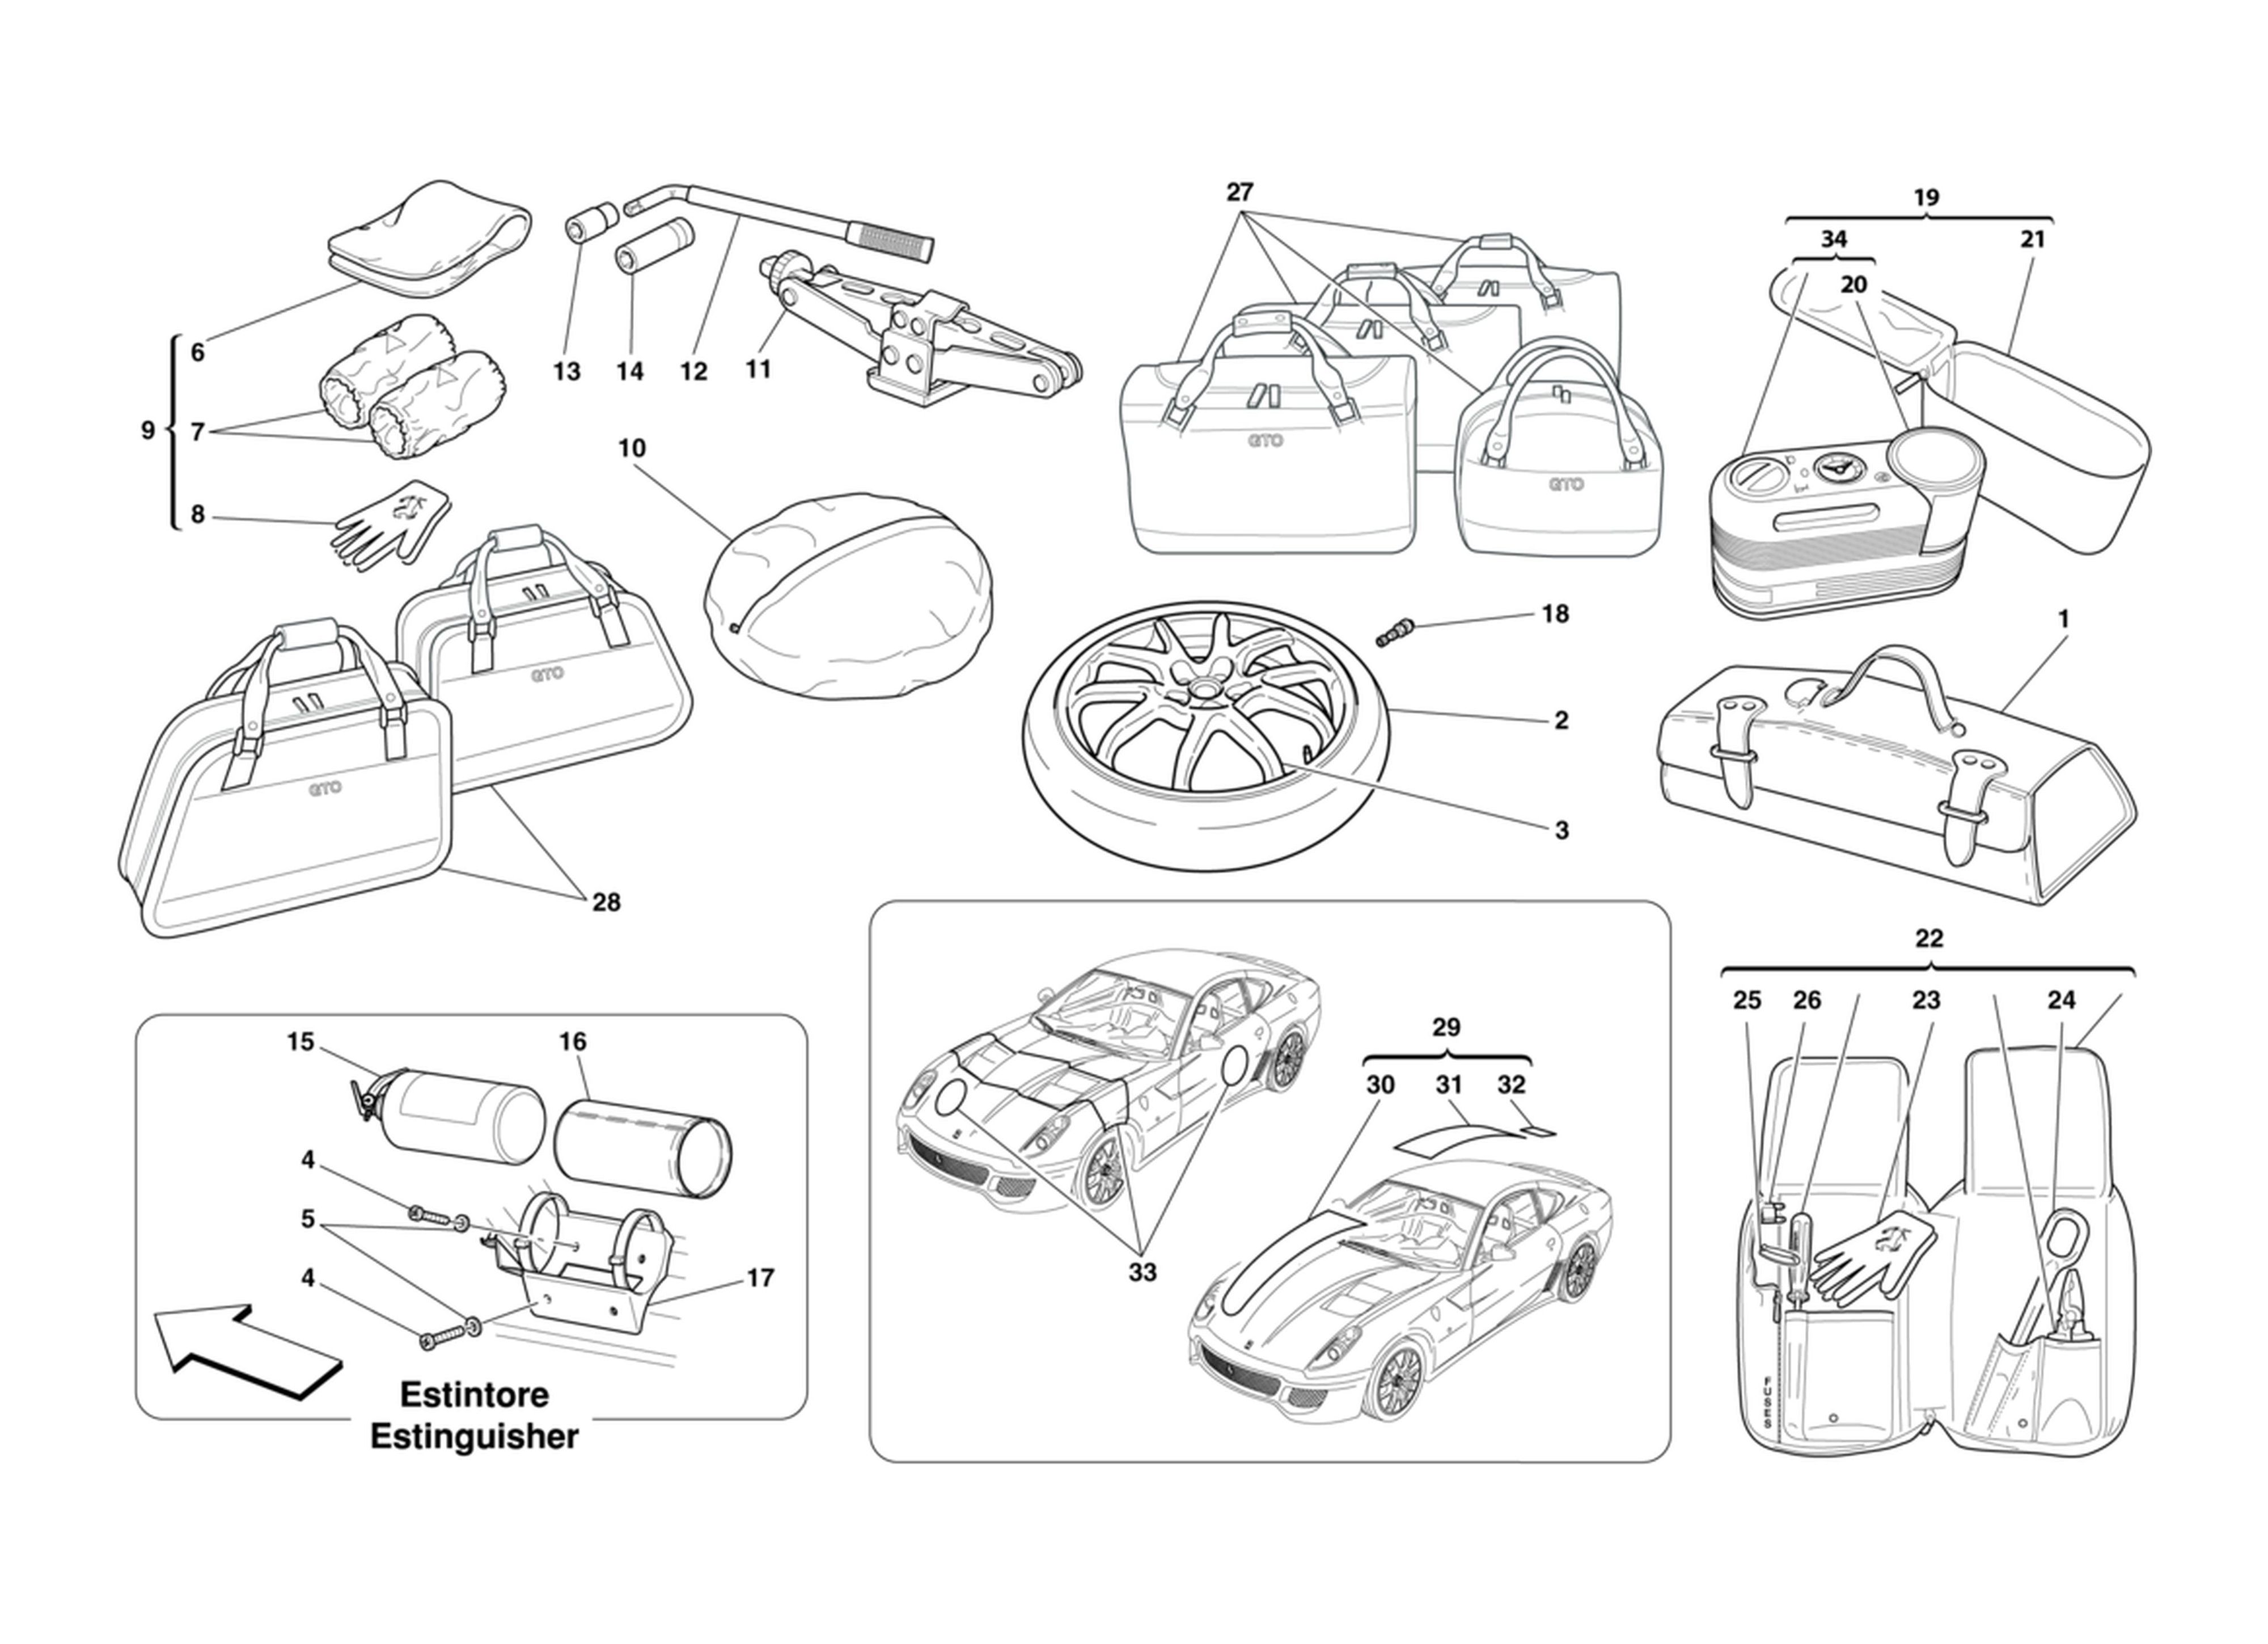 Schematic: Tools Provided With Vehicle